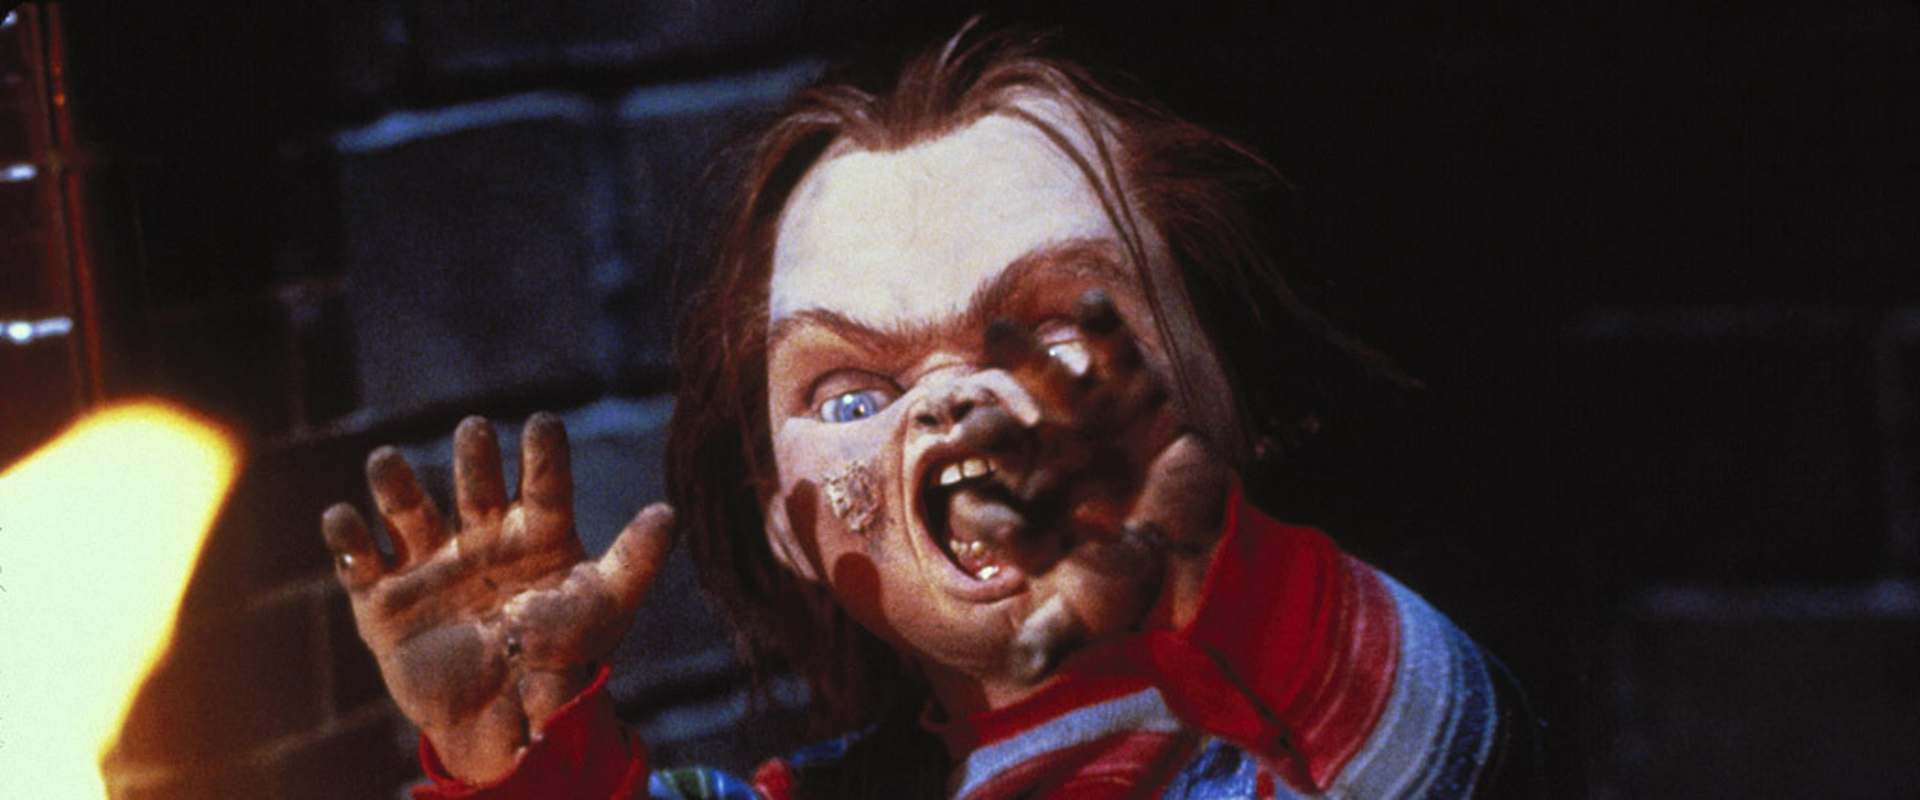 Child's Play background 2